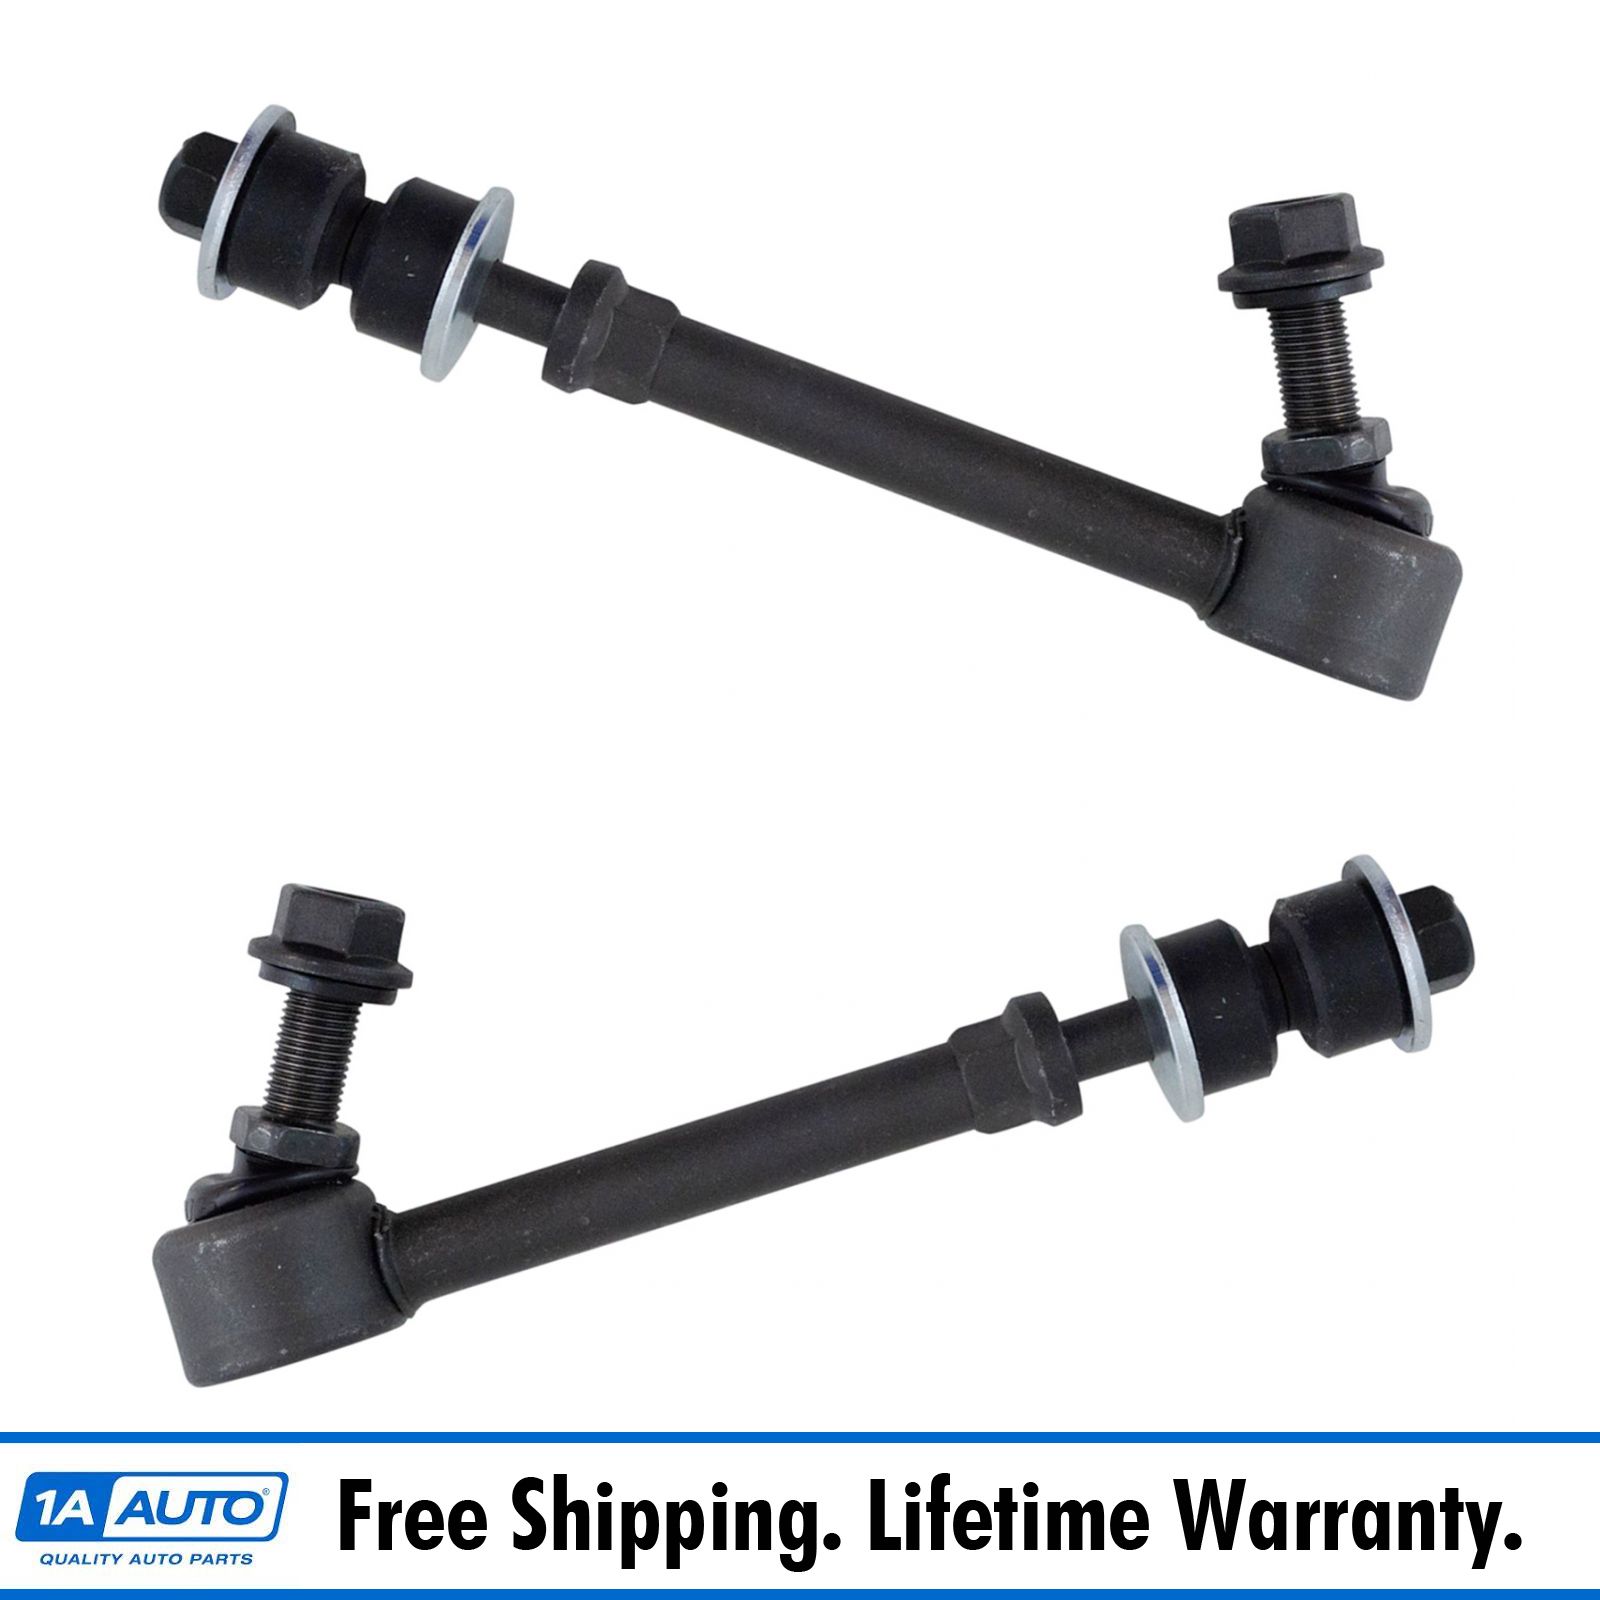 Rear Sway Bar End Link Pair for 2001 2002 2003 2004 2005-2007 Toyota Sequoia